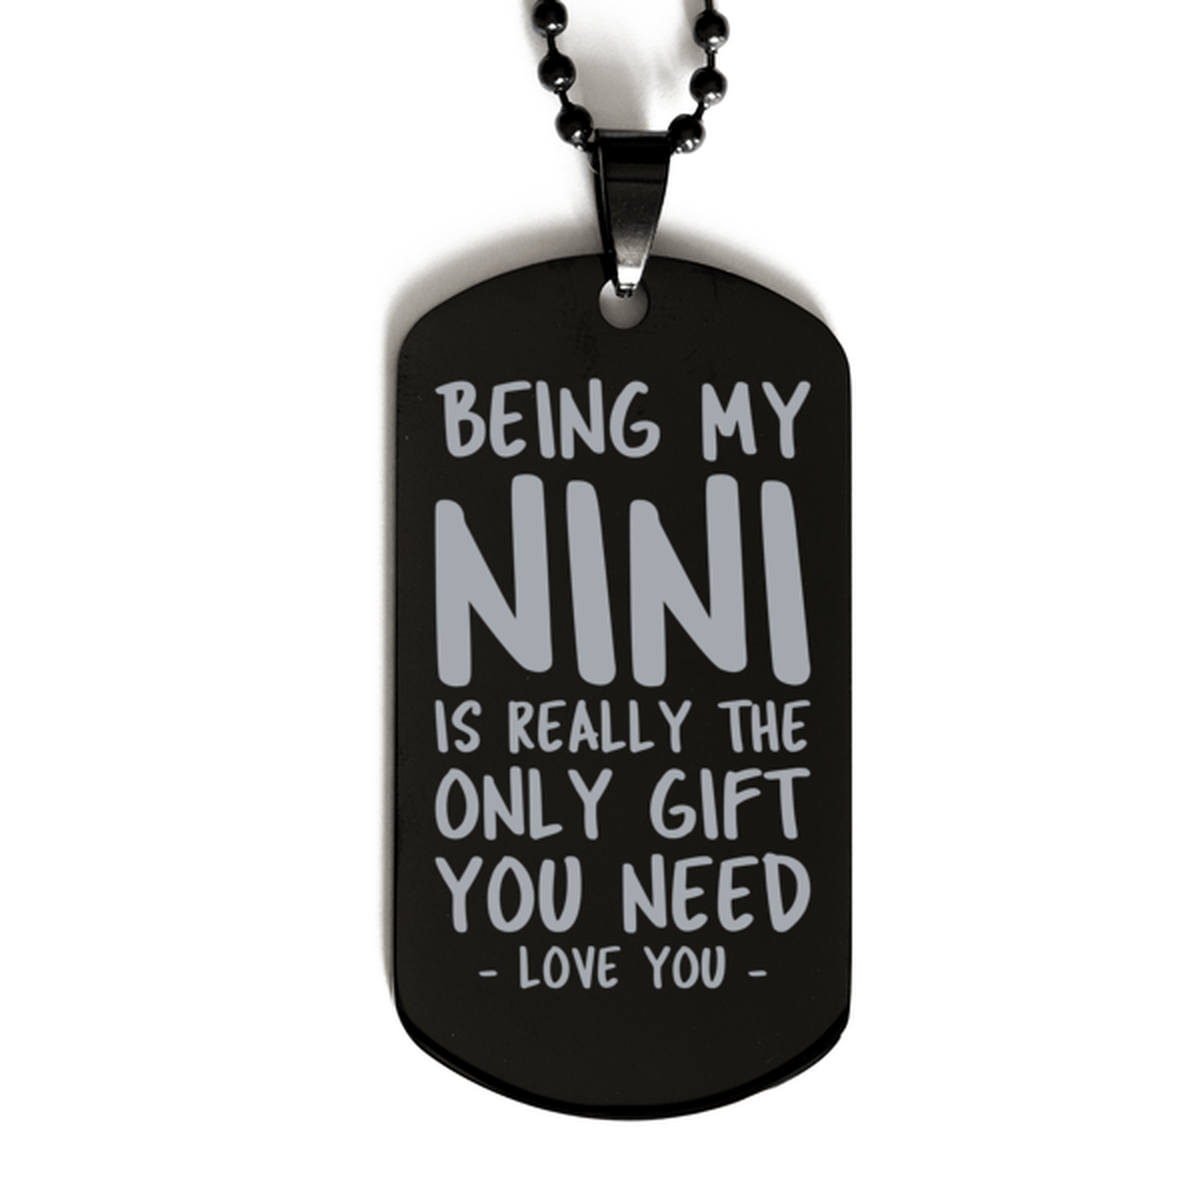 Funny Nini Black Dog Tag Necklace, Being My Nini Is Really the Only Gift You Need, Best Birthday Gifts for Nini